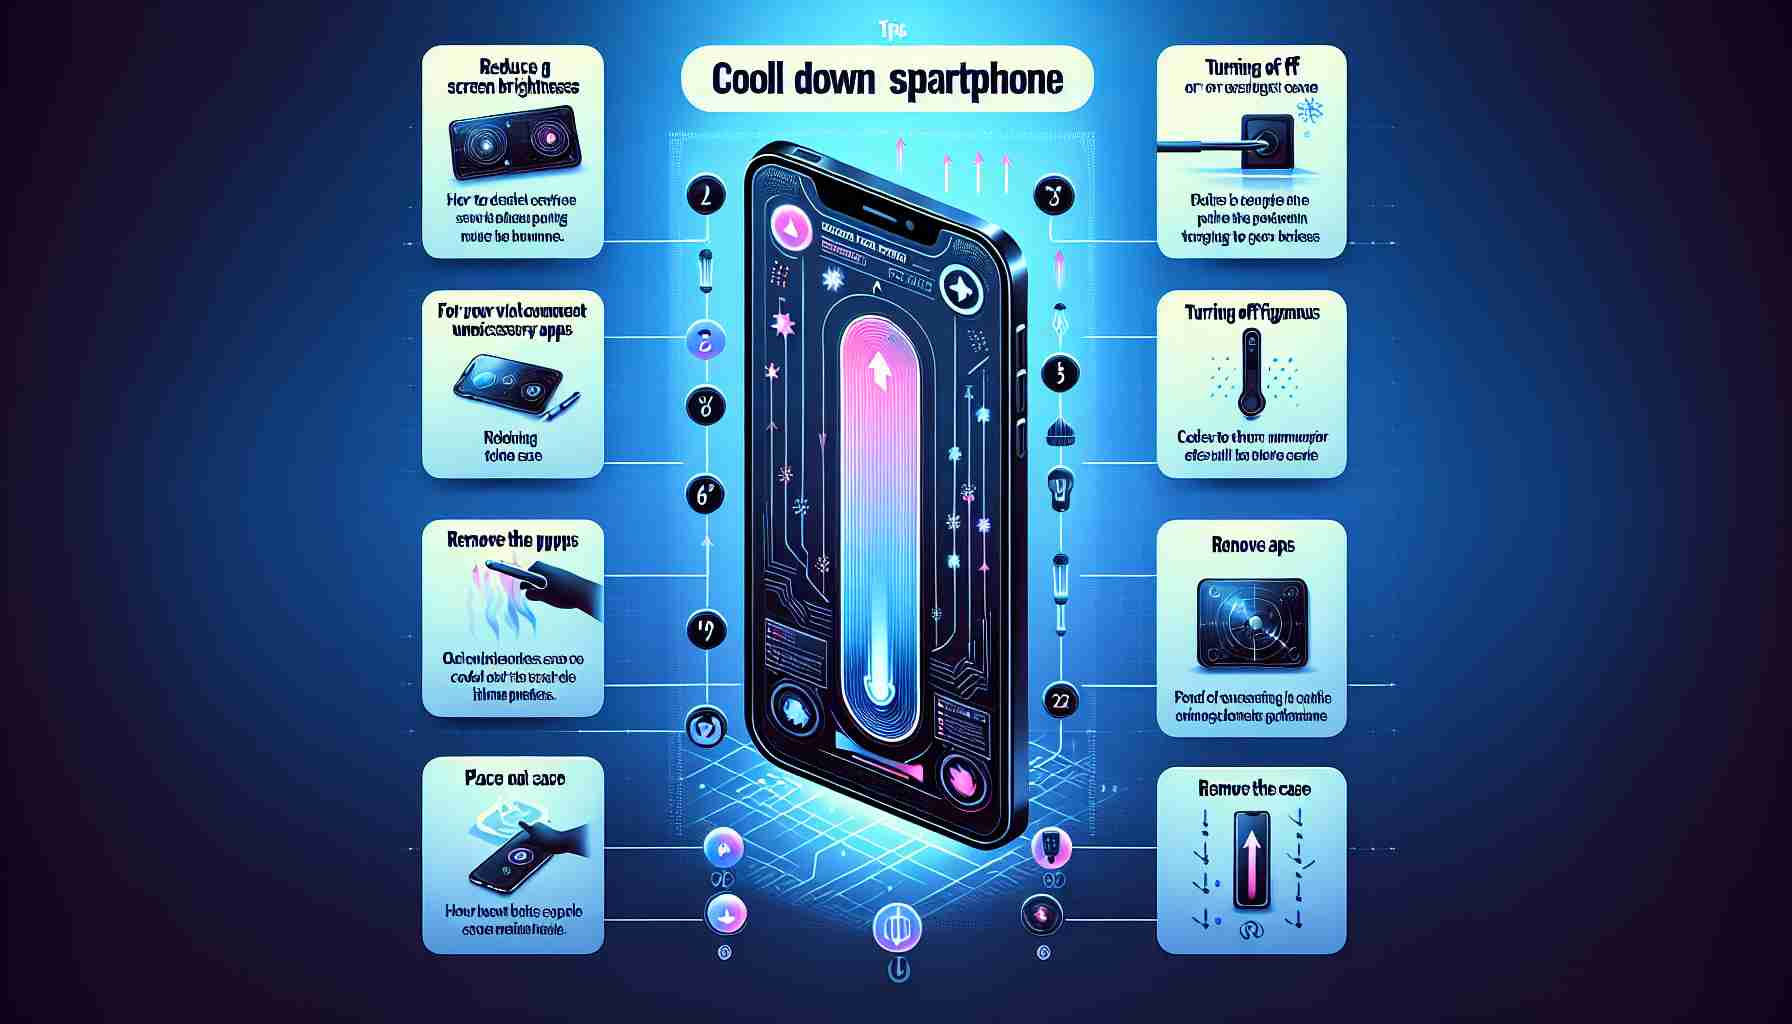 Effective Tips to Cool Down Your Smartphone Safely